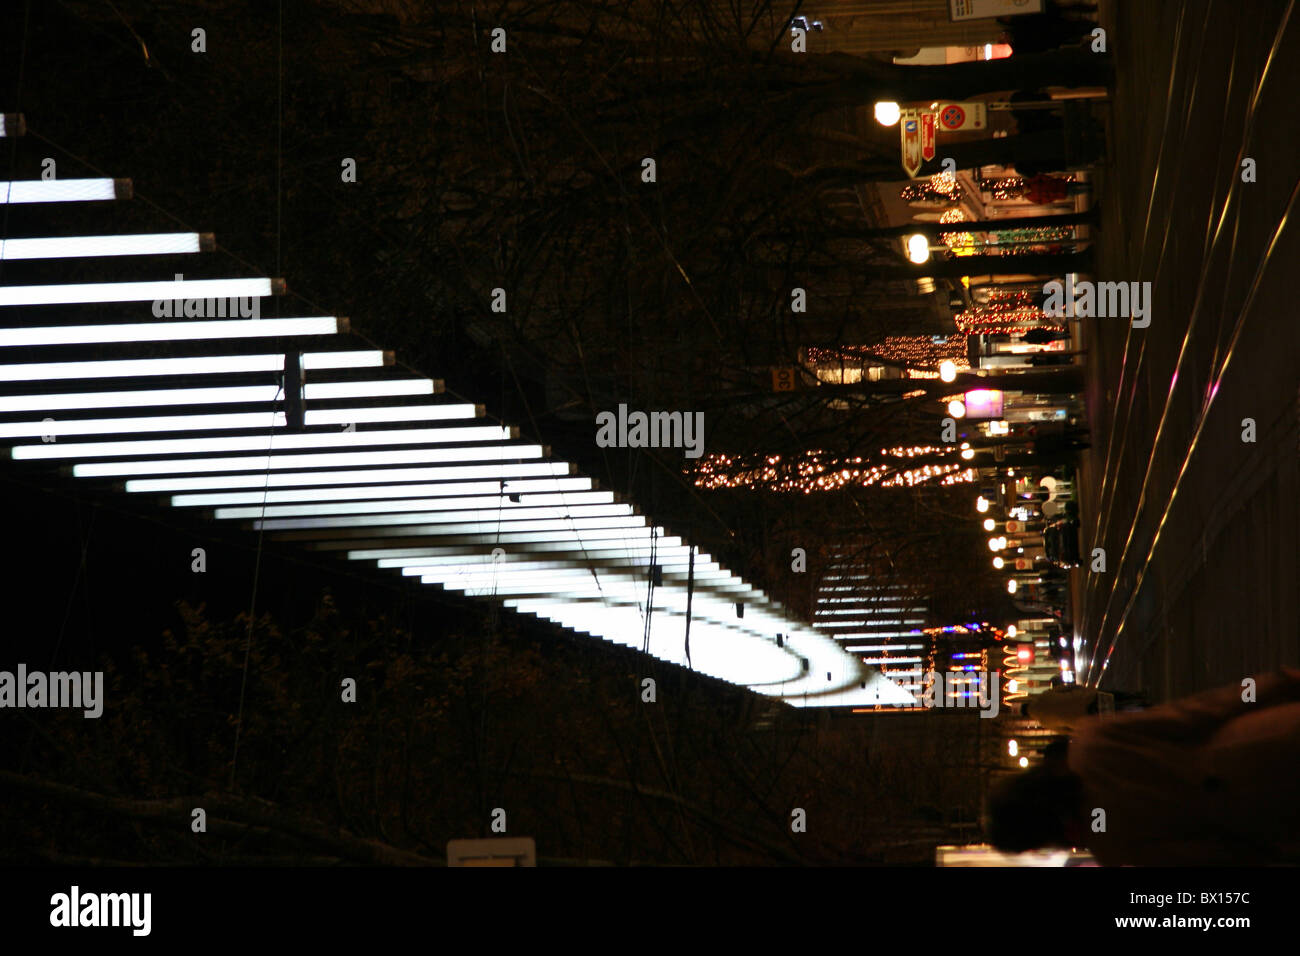 Zurich town city Christmas Bahnhofstrasse at night night business trades stores shopping person lighting Stock Photo